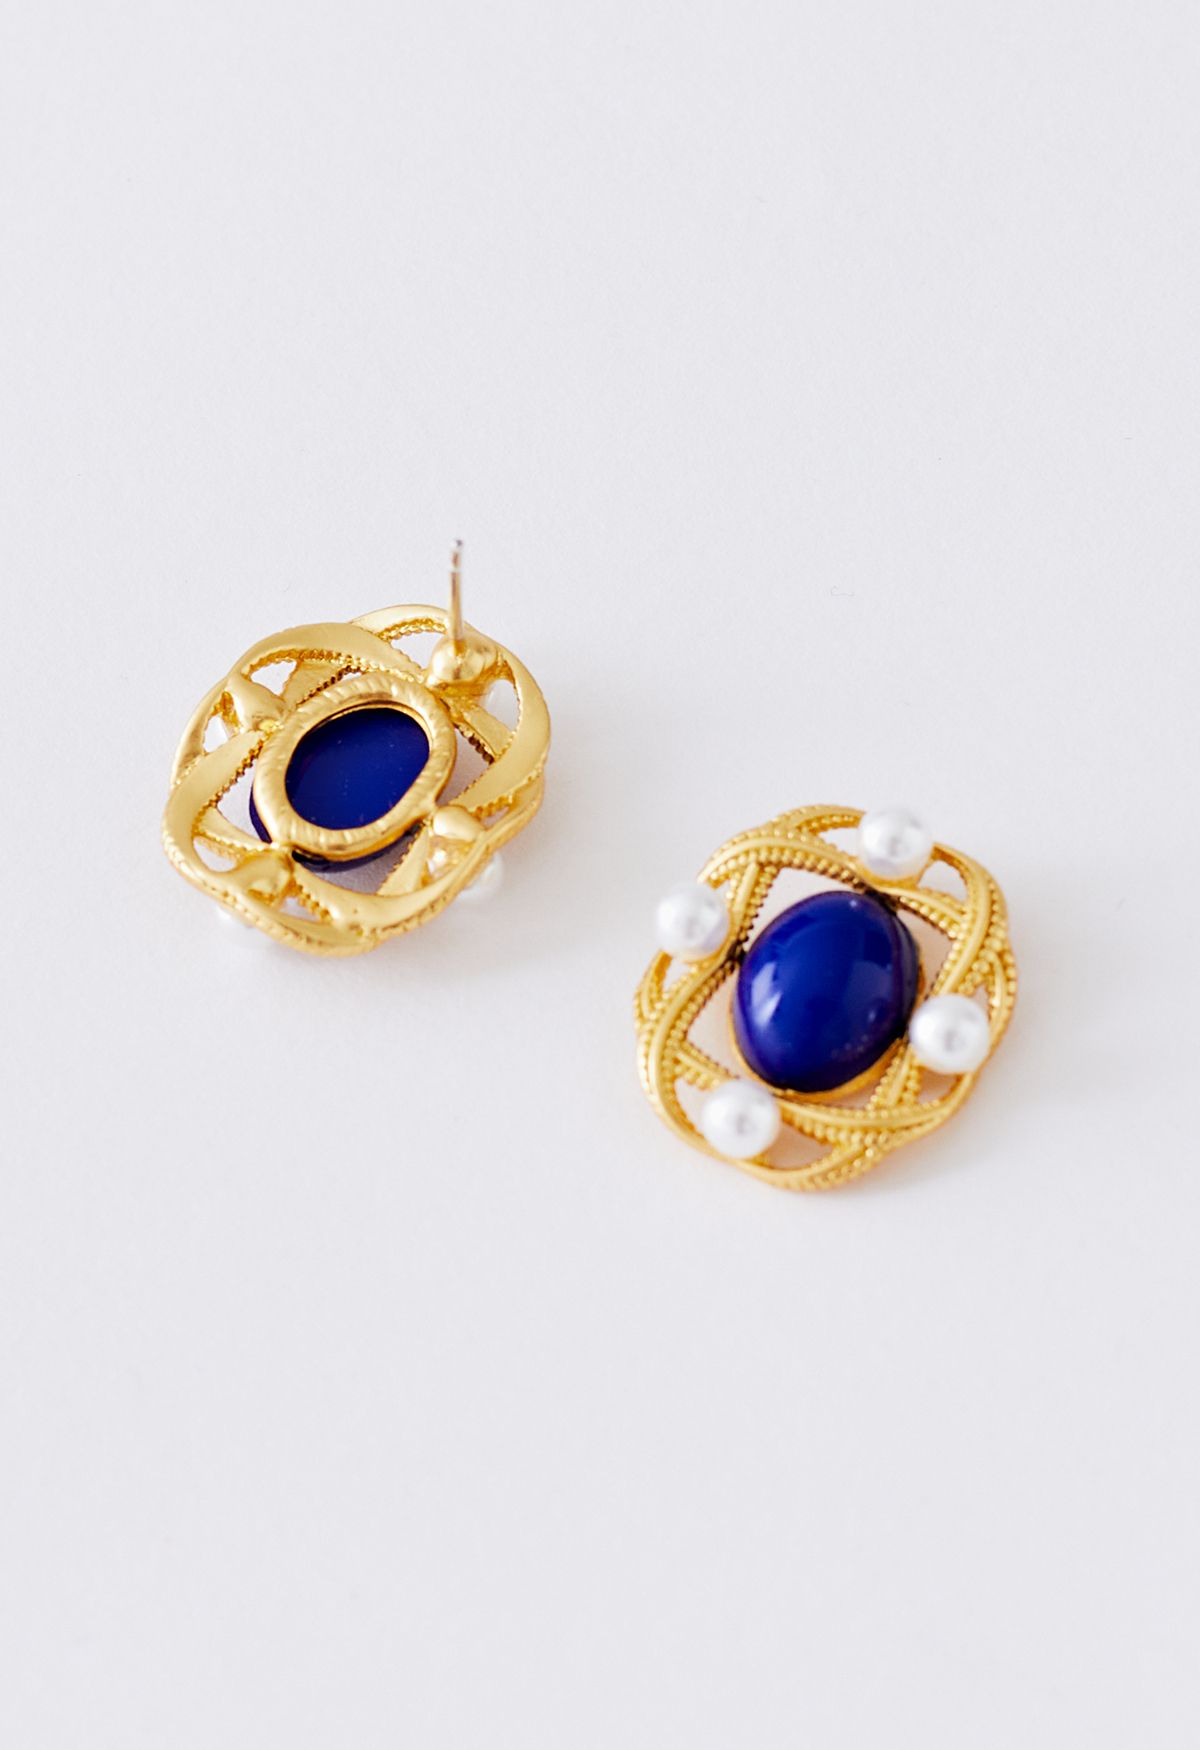 Hollow Out Intertwine Metal Pearl Earrings in Indigo